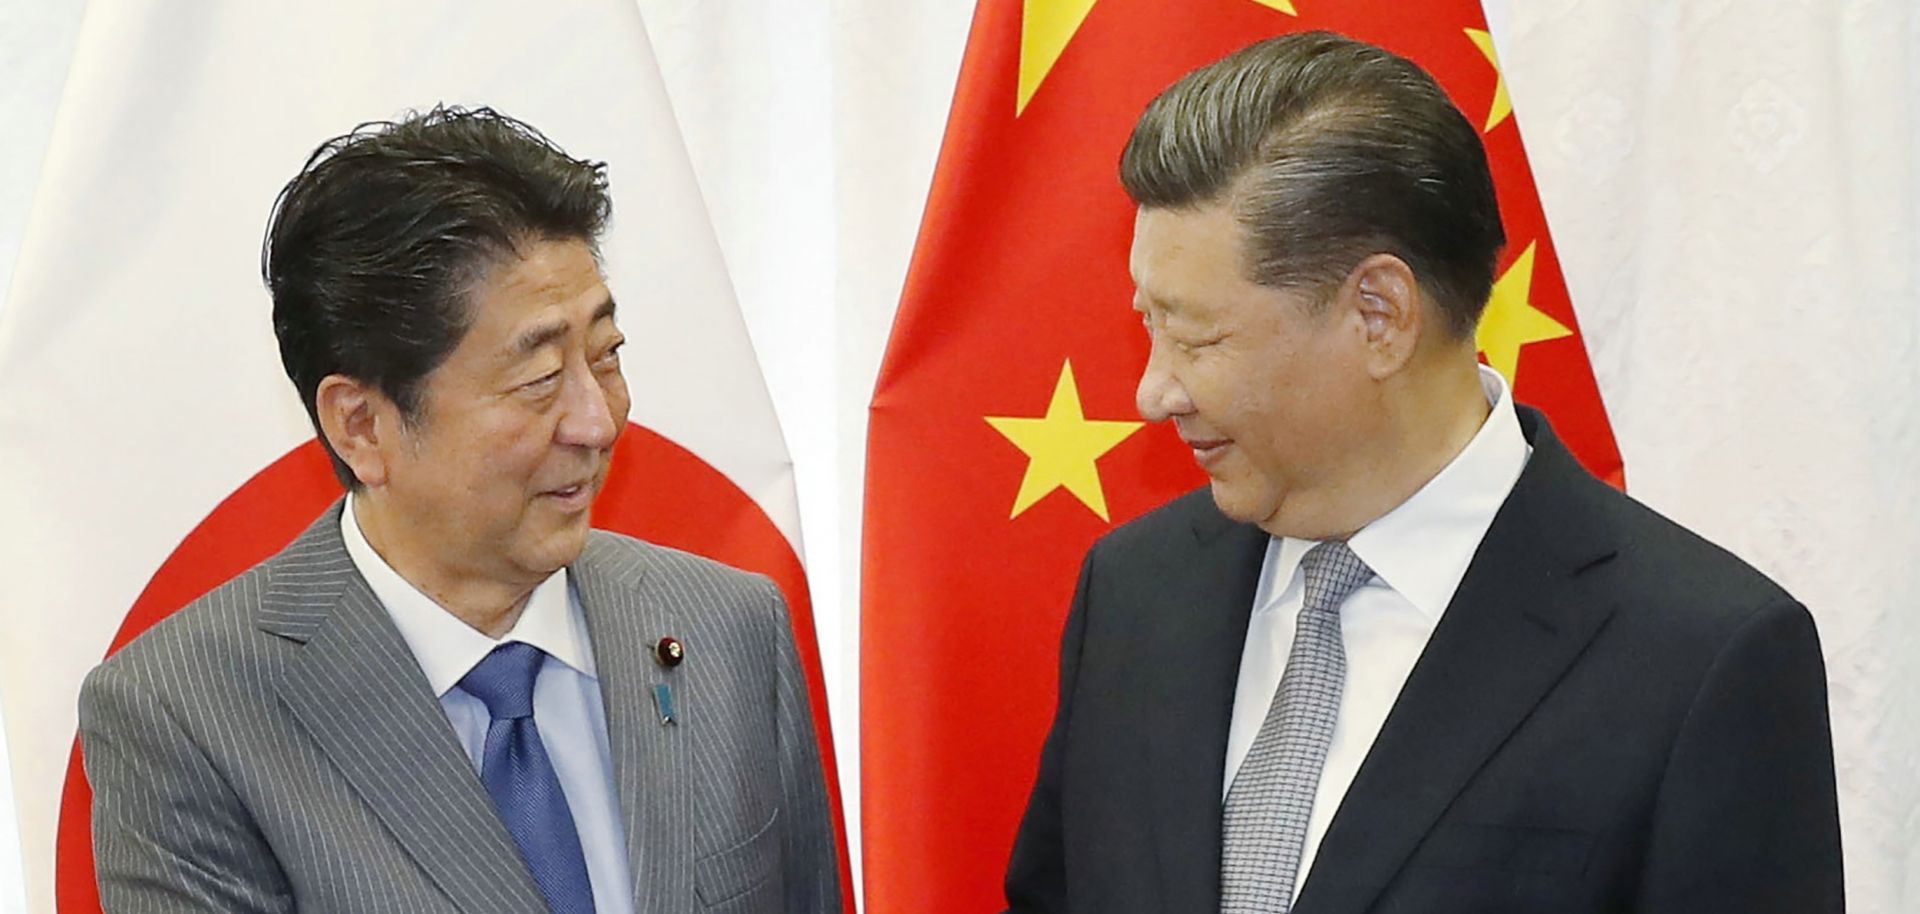 Japanese Prime Minister Shinzo Abe shakes hands with Chinese President Xi Jinping before a bilateral meeting in Russia during the 2018 Eastern Economic Forum.